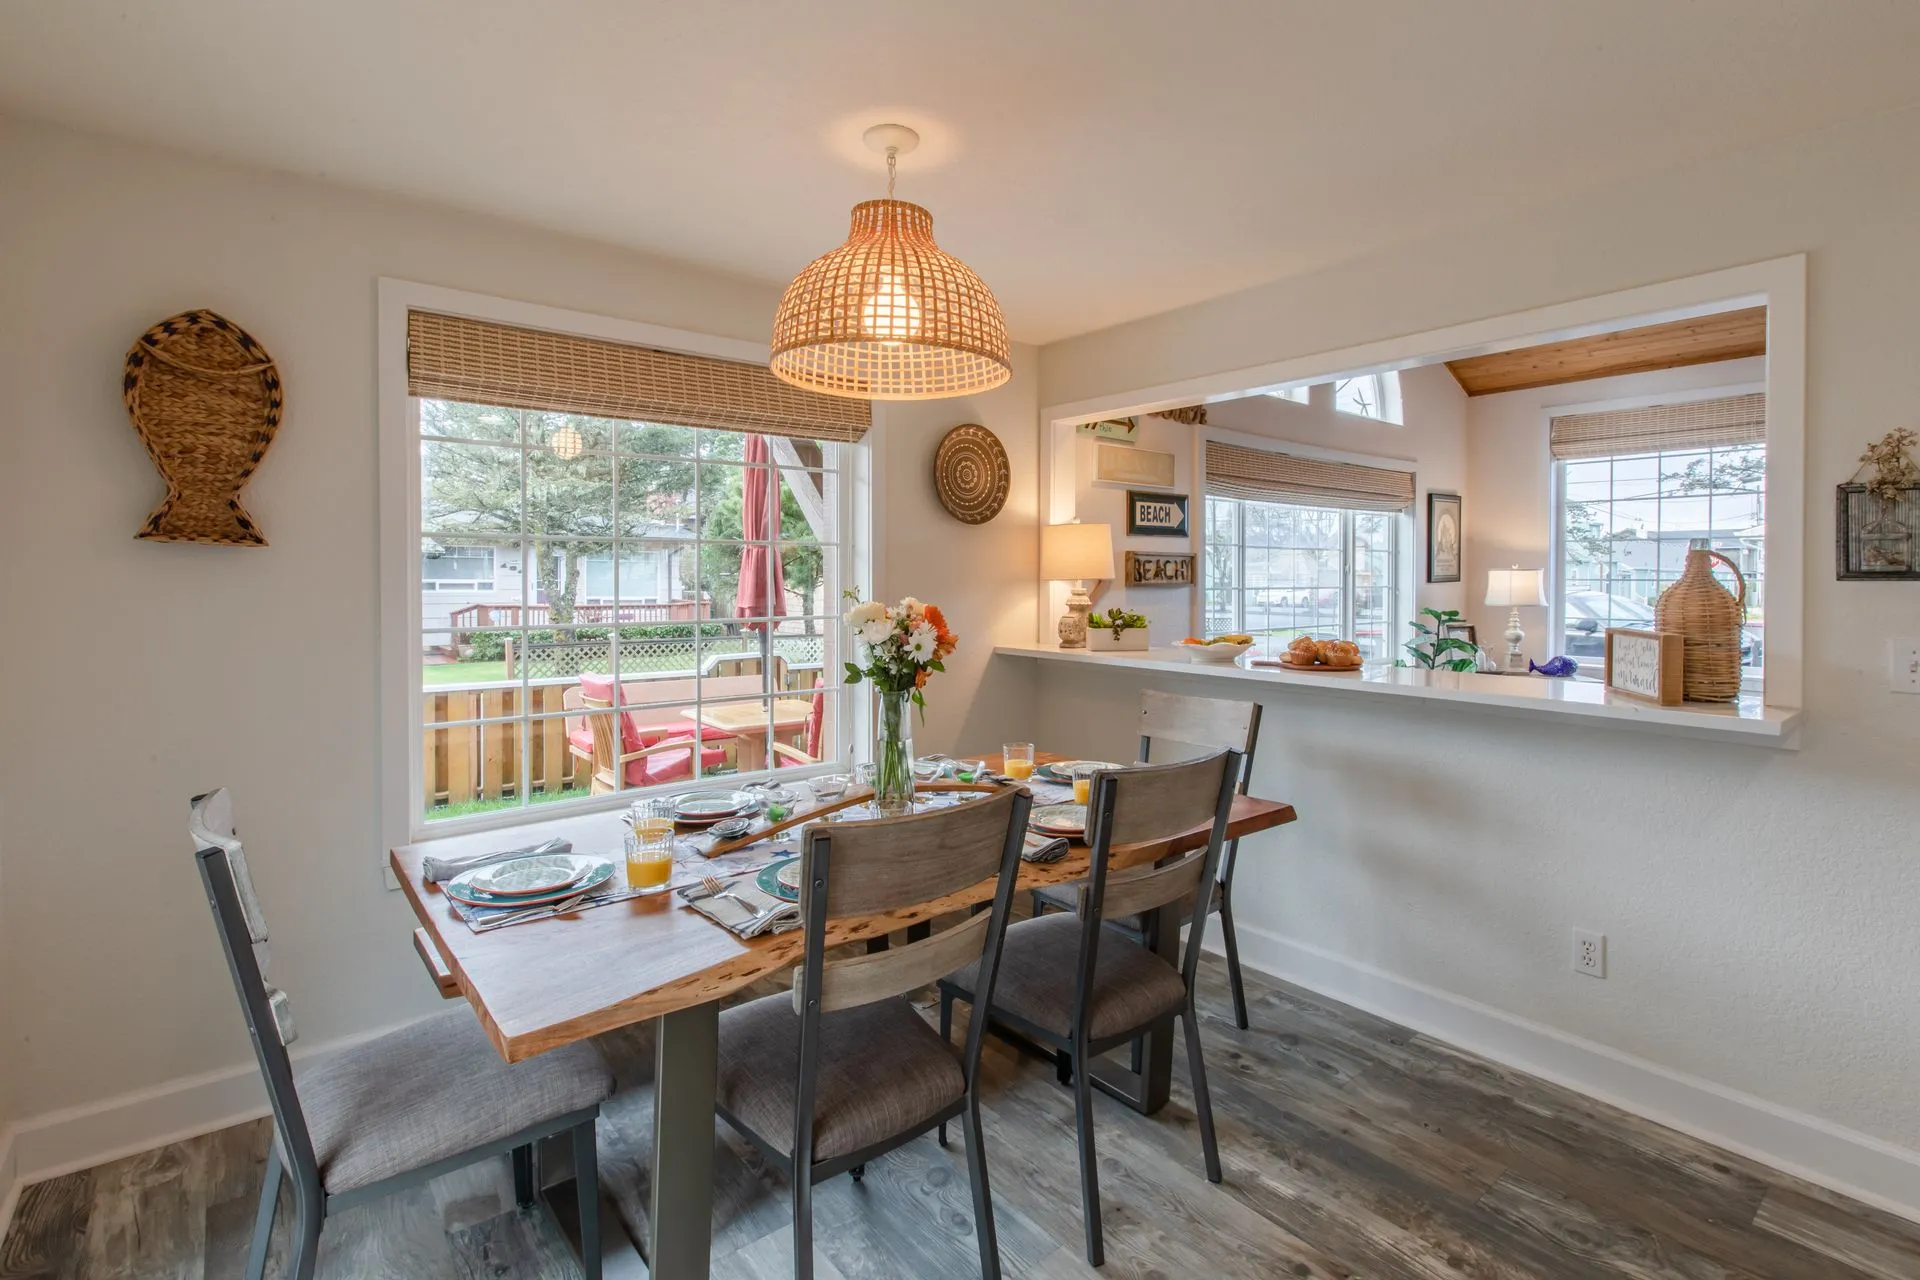 Vacation Rental in Cannon Beach, Puffin Nest dining table and chairs